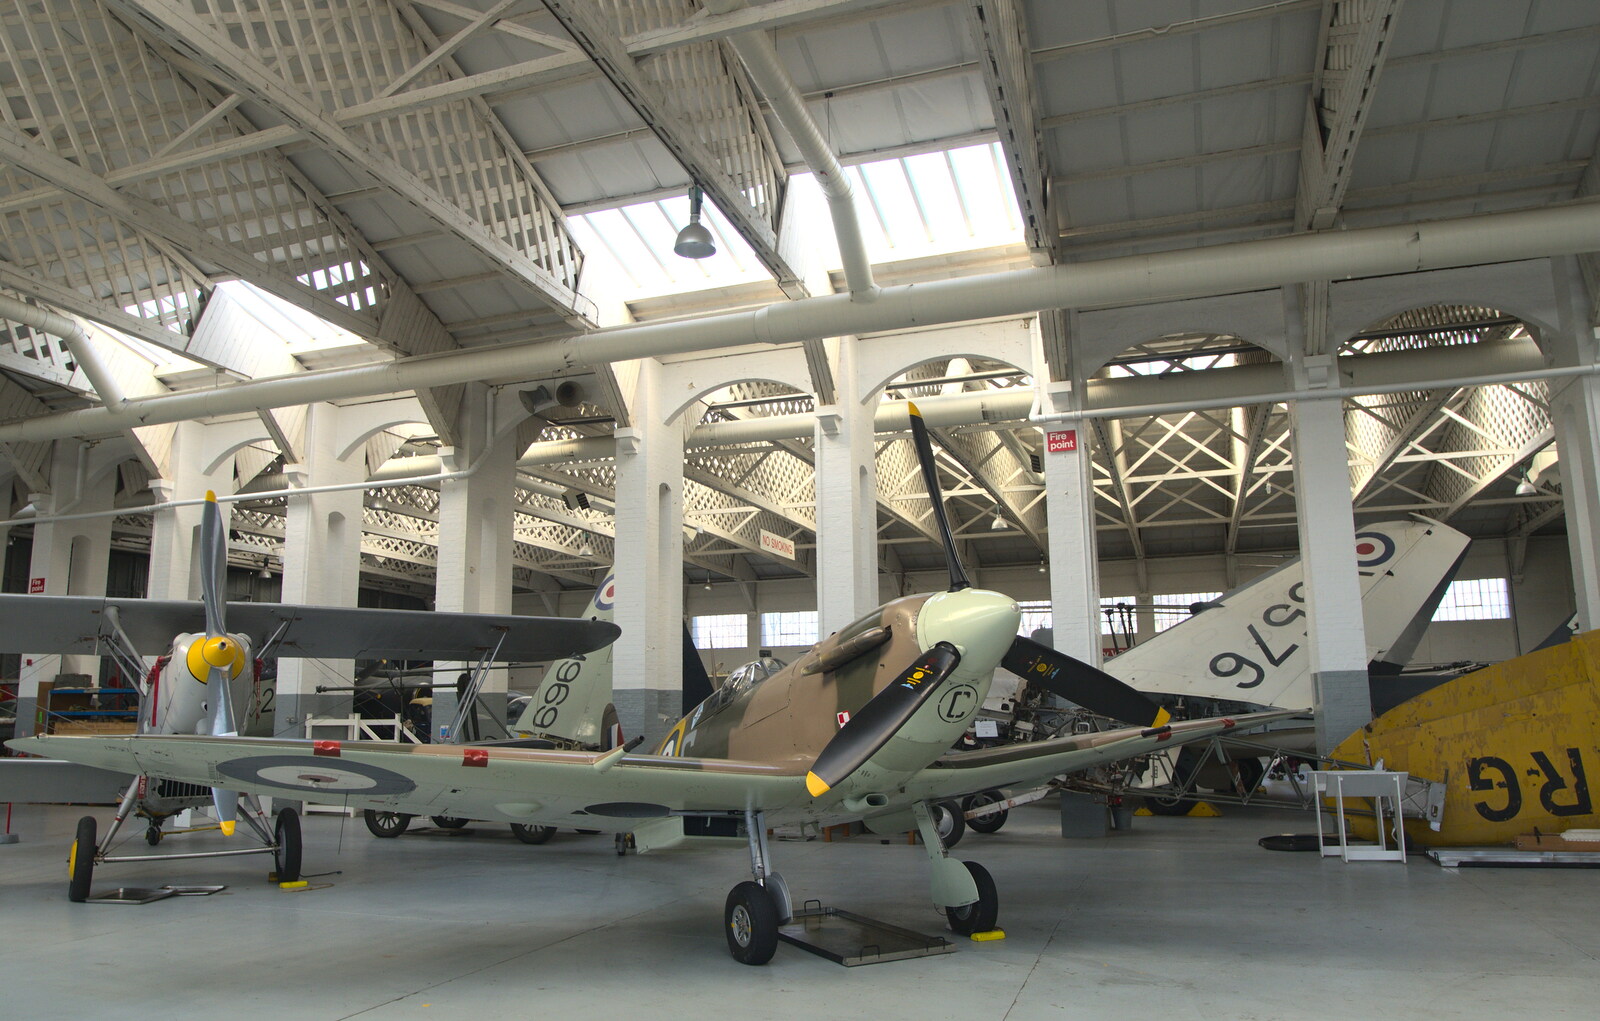 Another Spitfire, in its original home from A Day Out at Duxford, Cambridgeshire - 9th March 2014